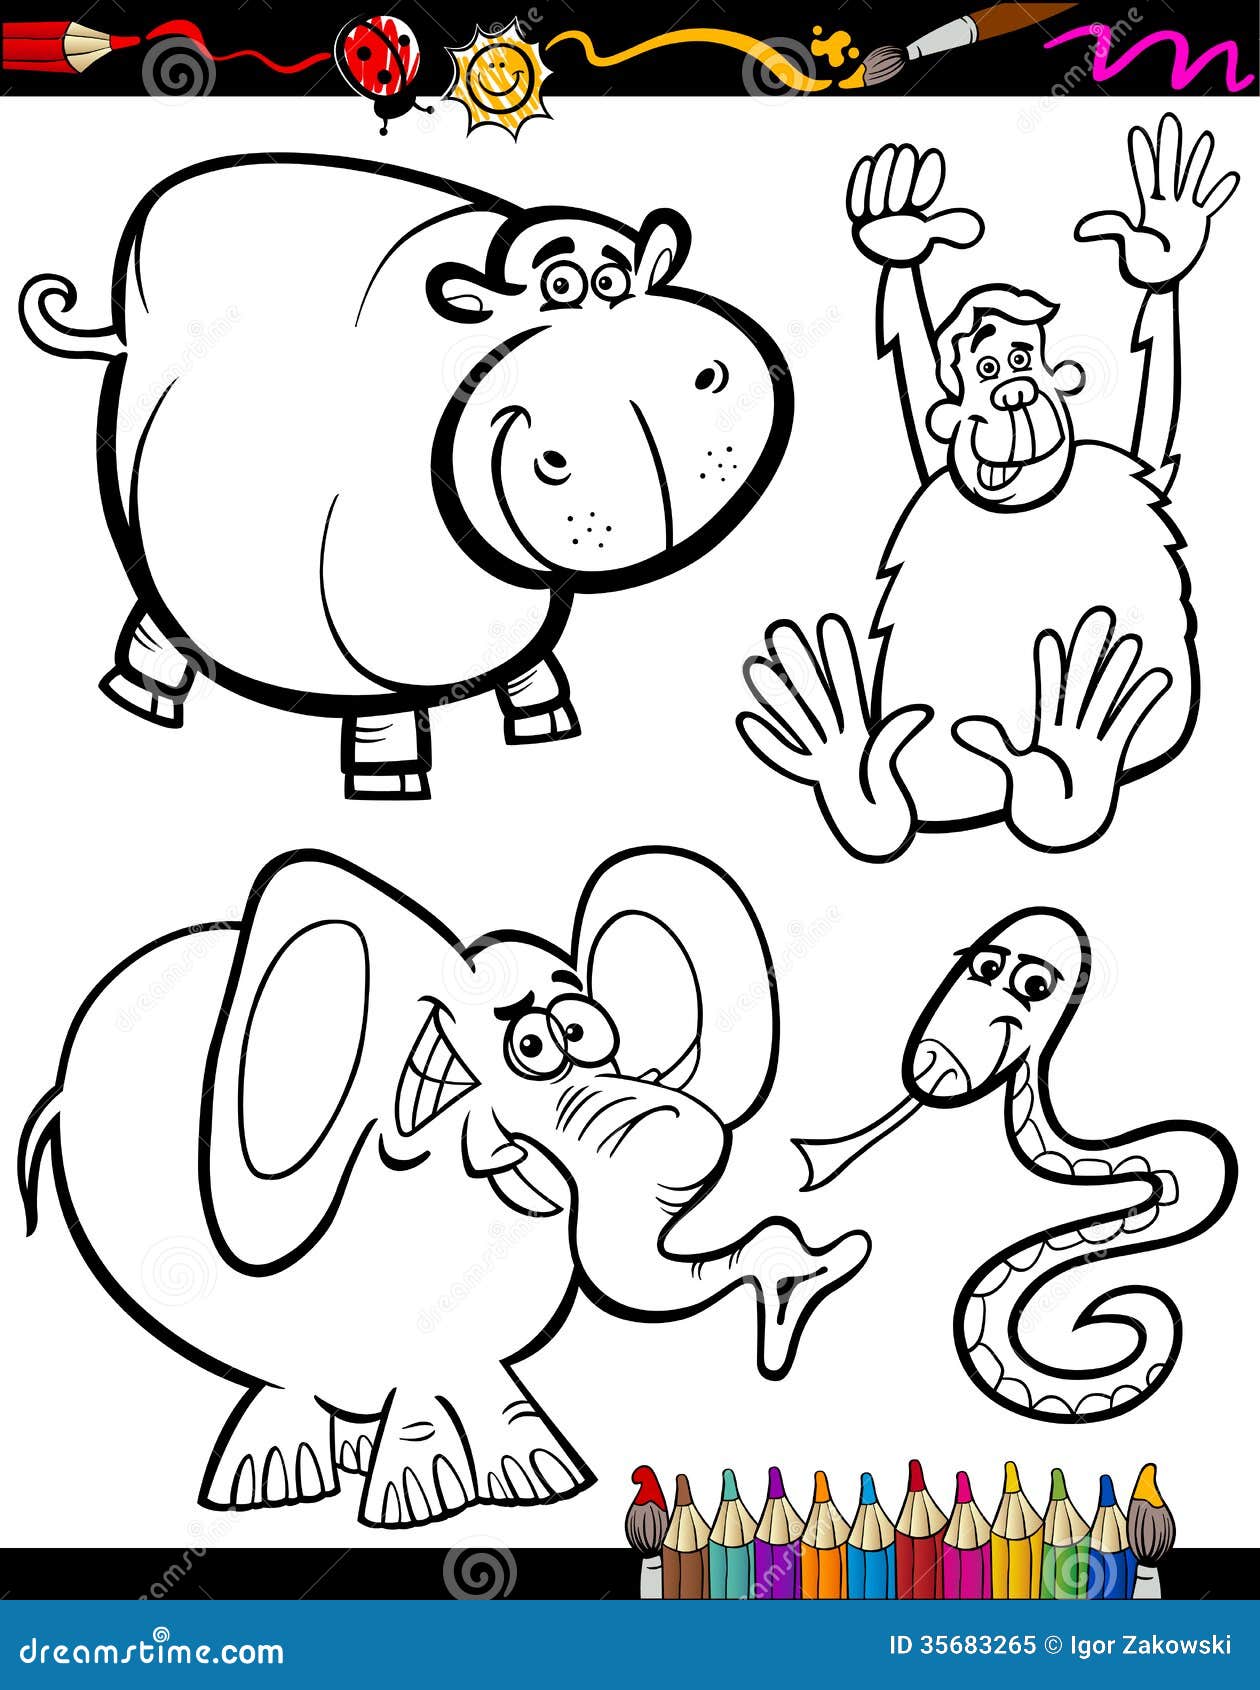 Download Cartoon Animals For Coloring Book Stock Vector - Illustration of coloring, children: 35683265